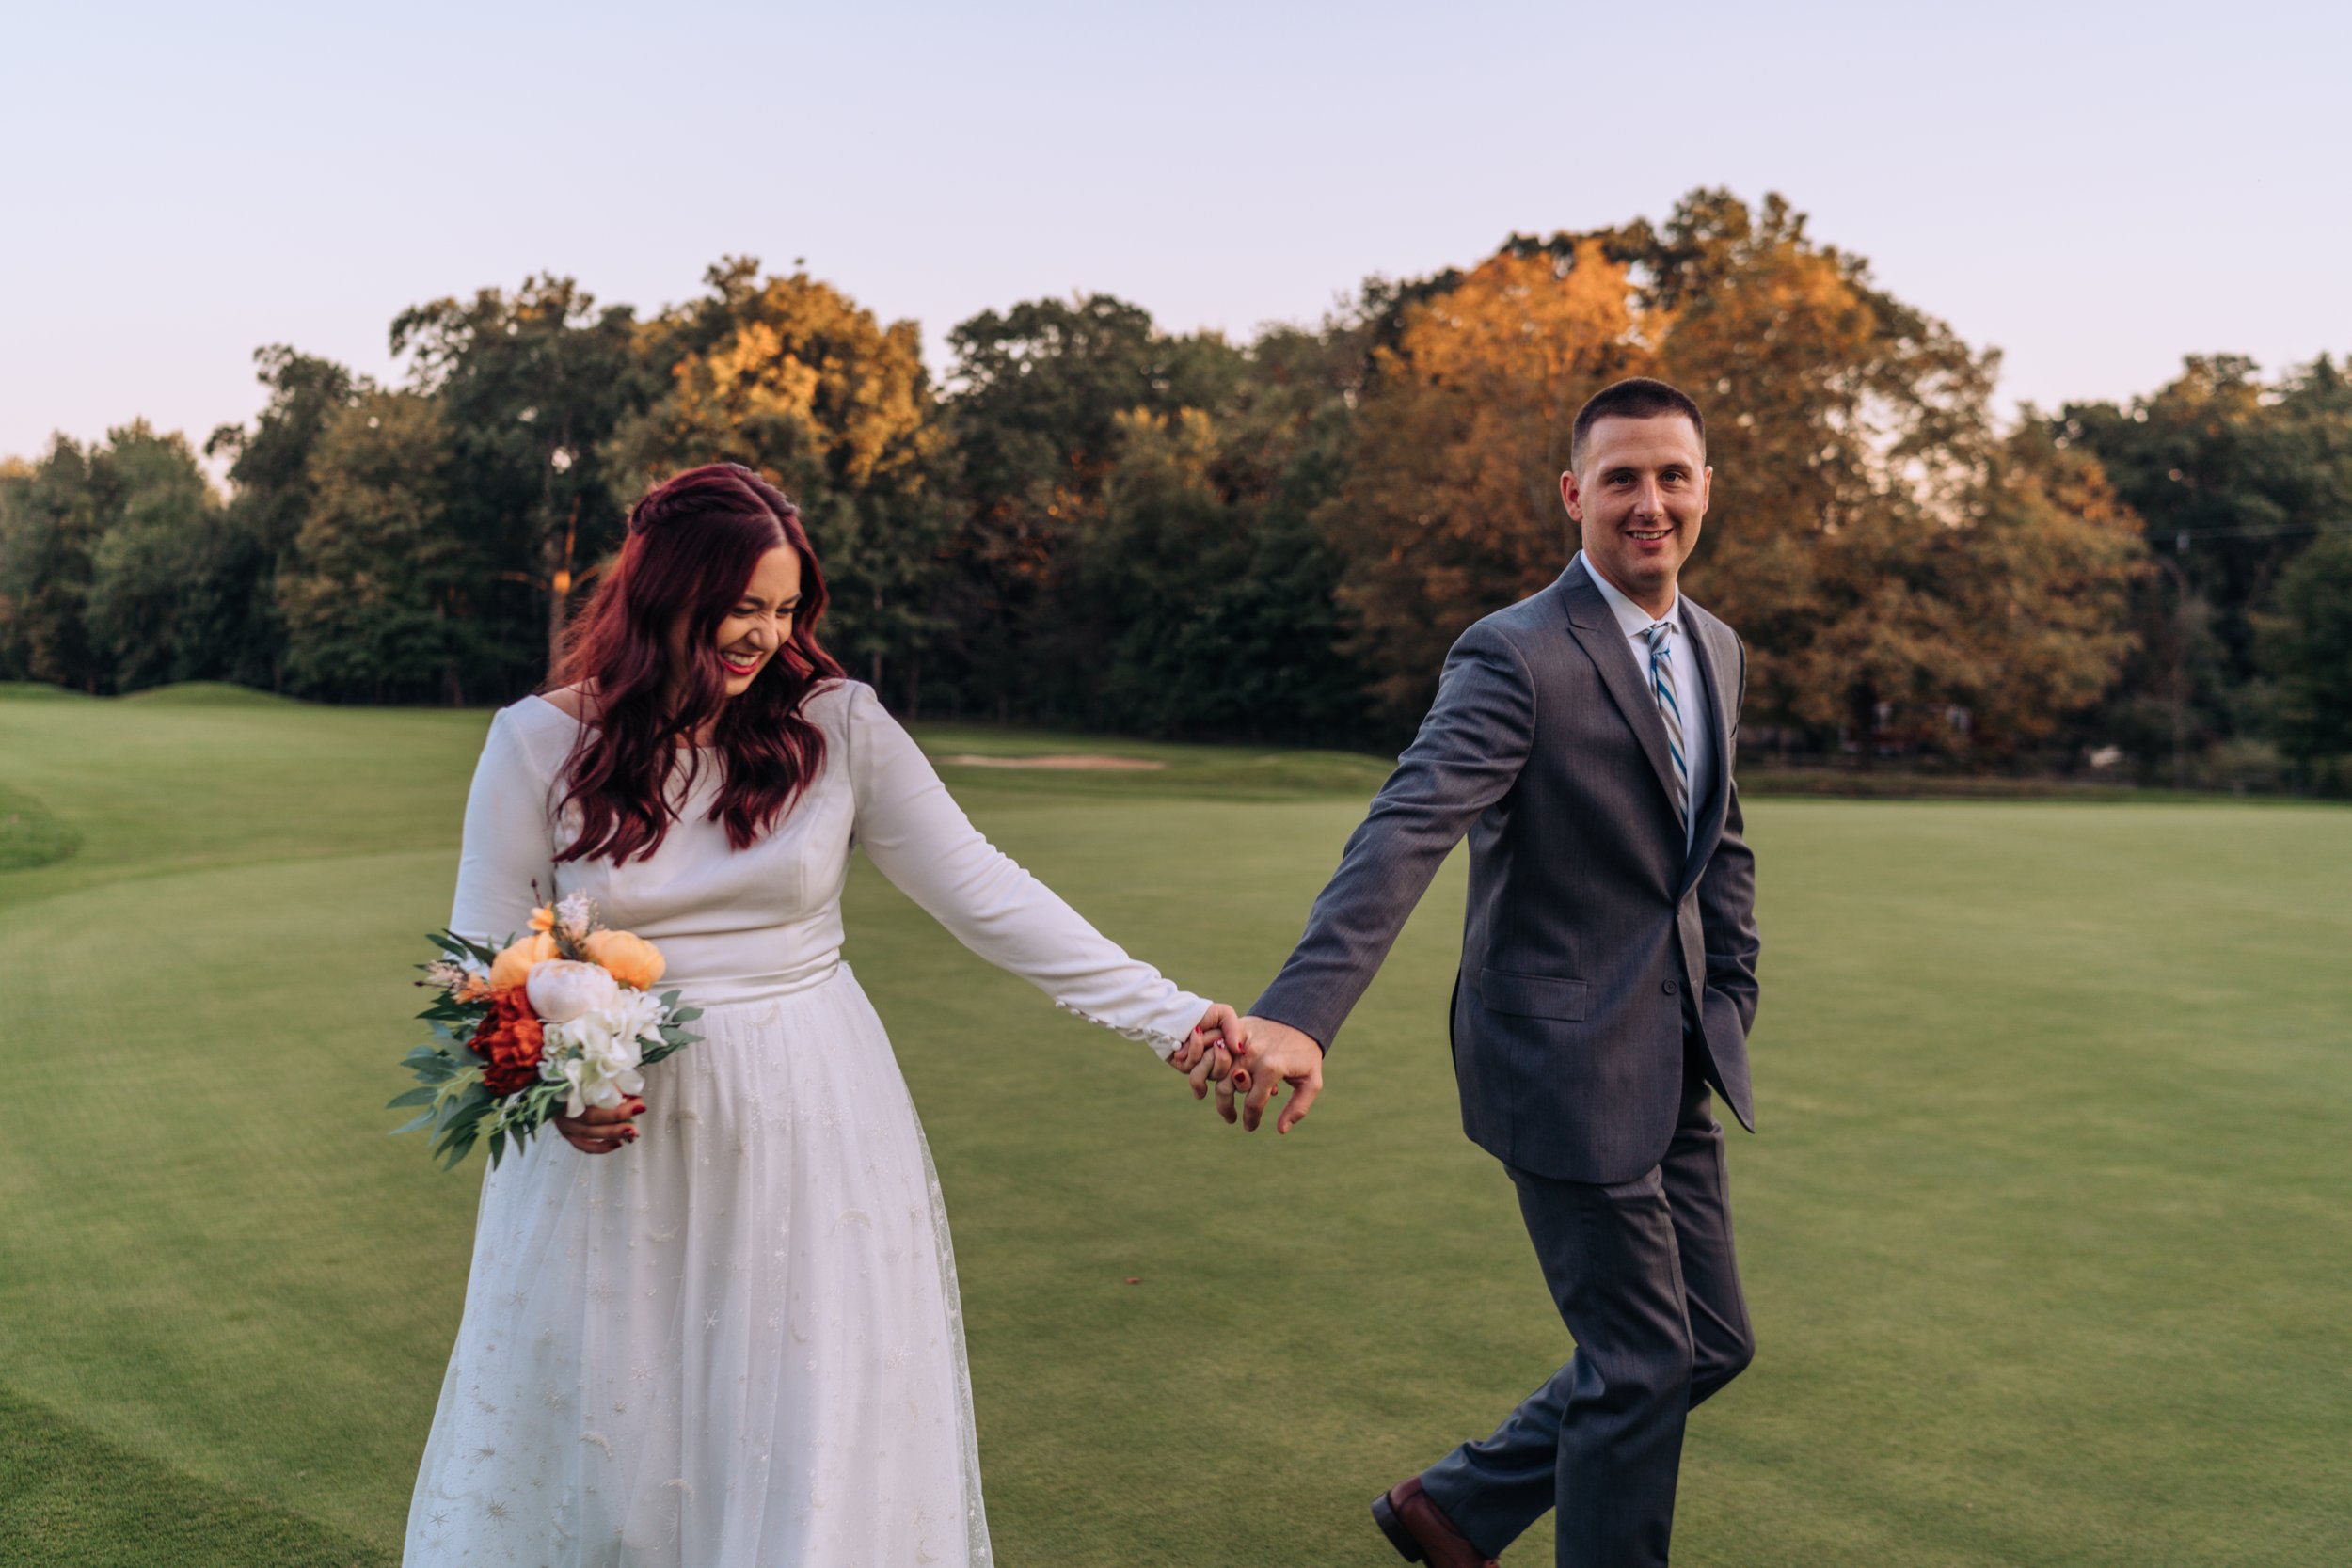 A new wife and husband hold hands and walk across a golf field, laughing.